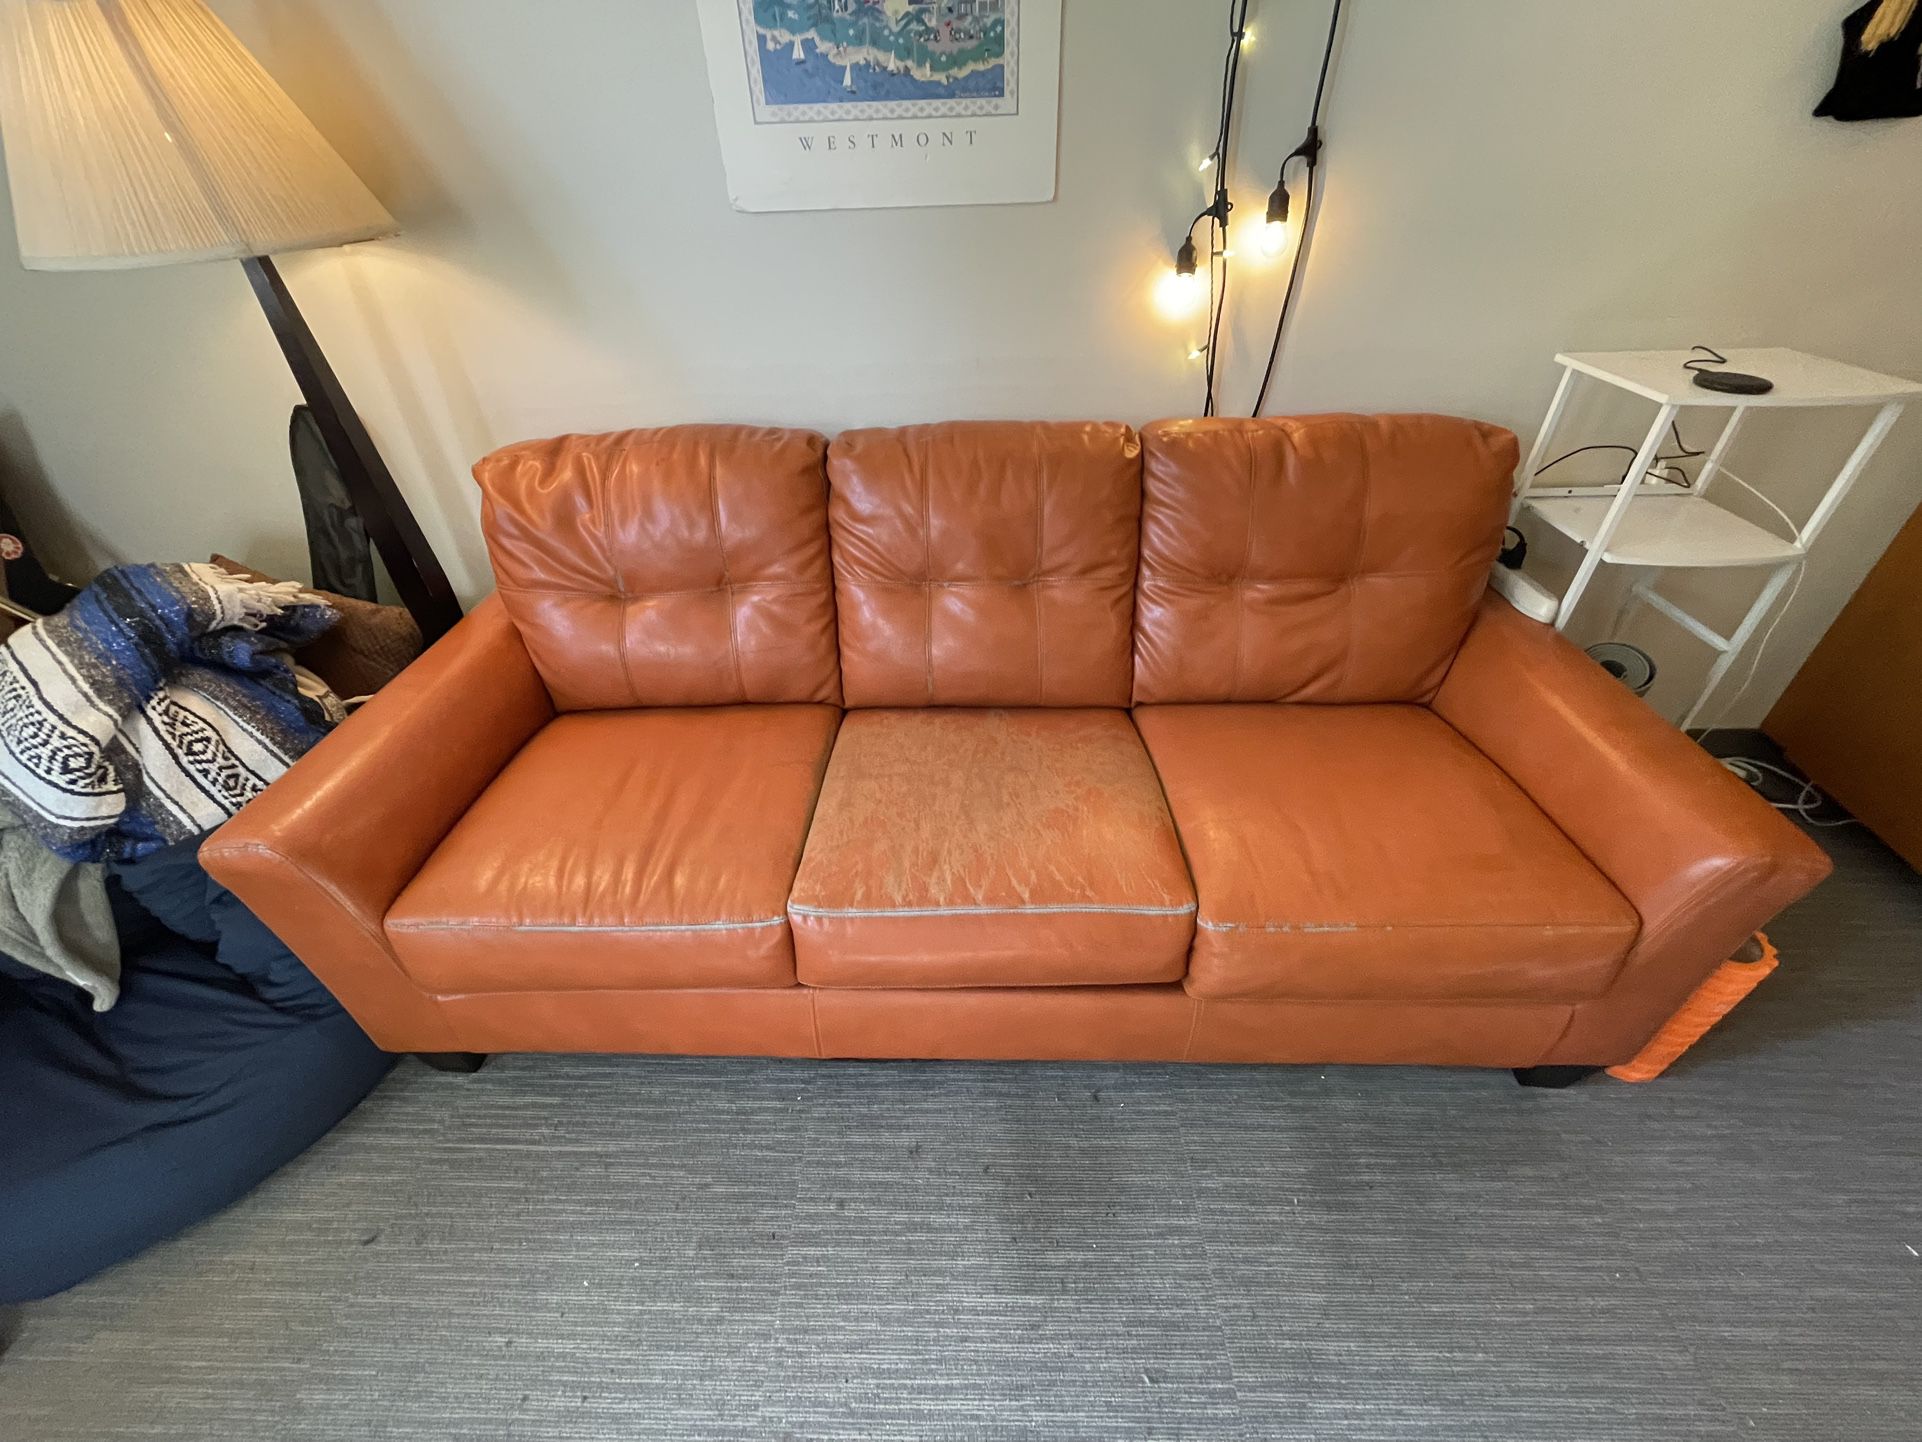 Leather Couch For Sale